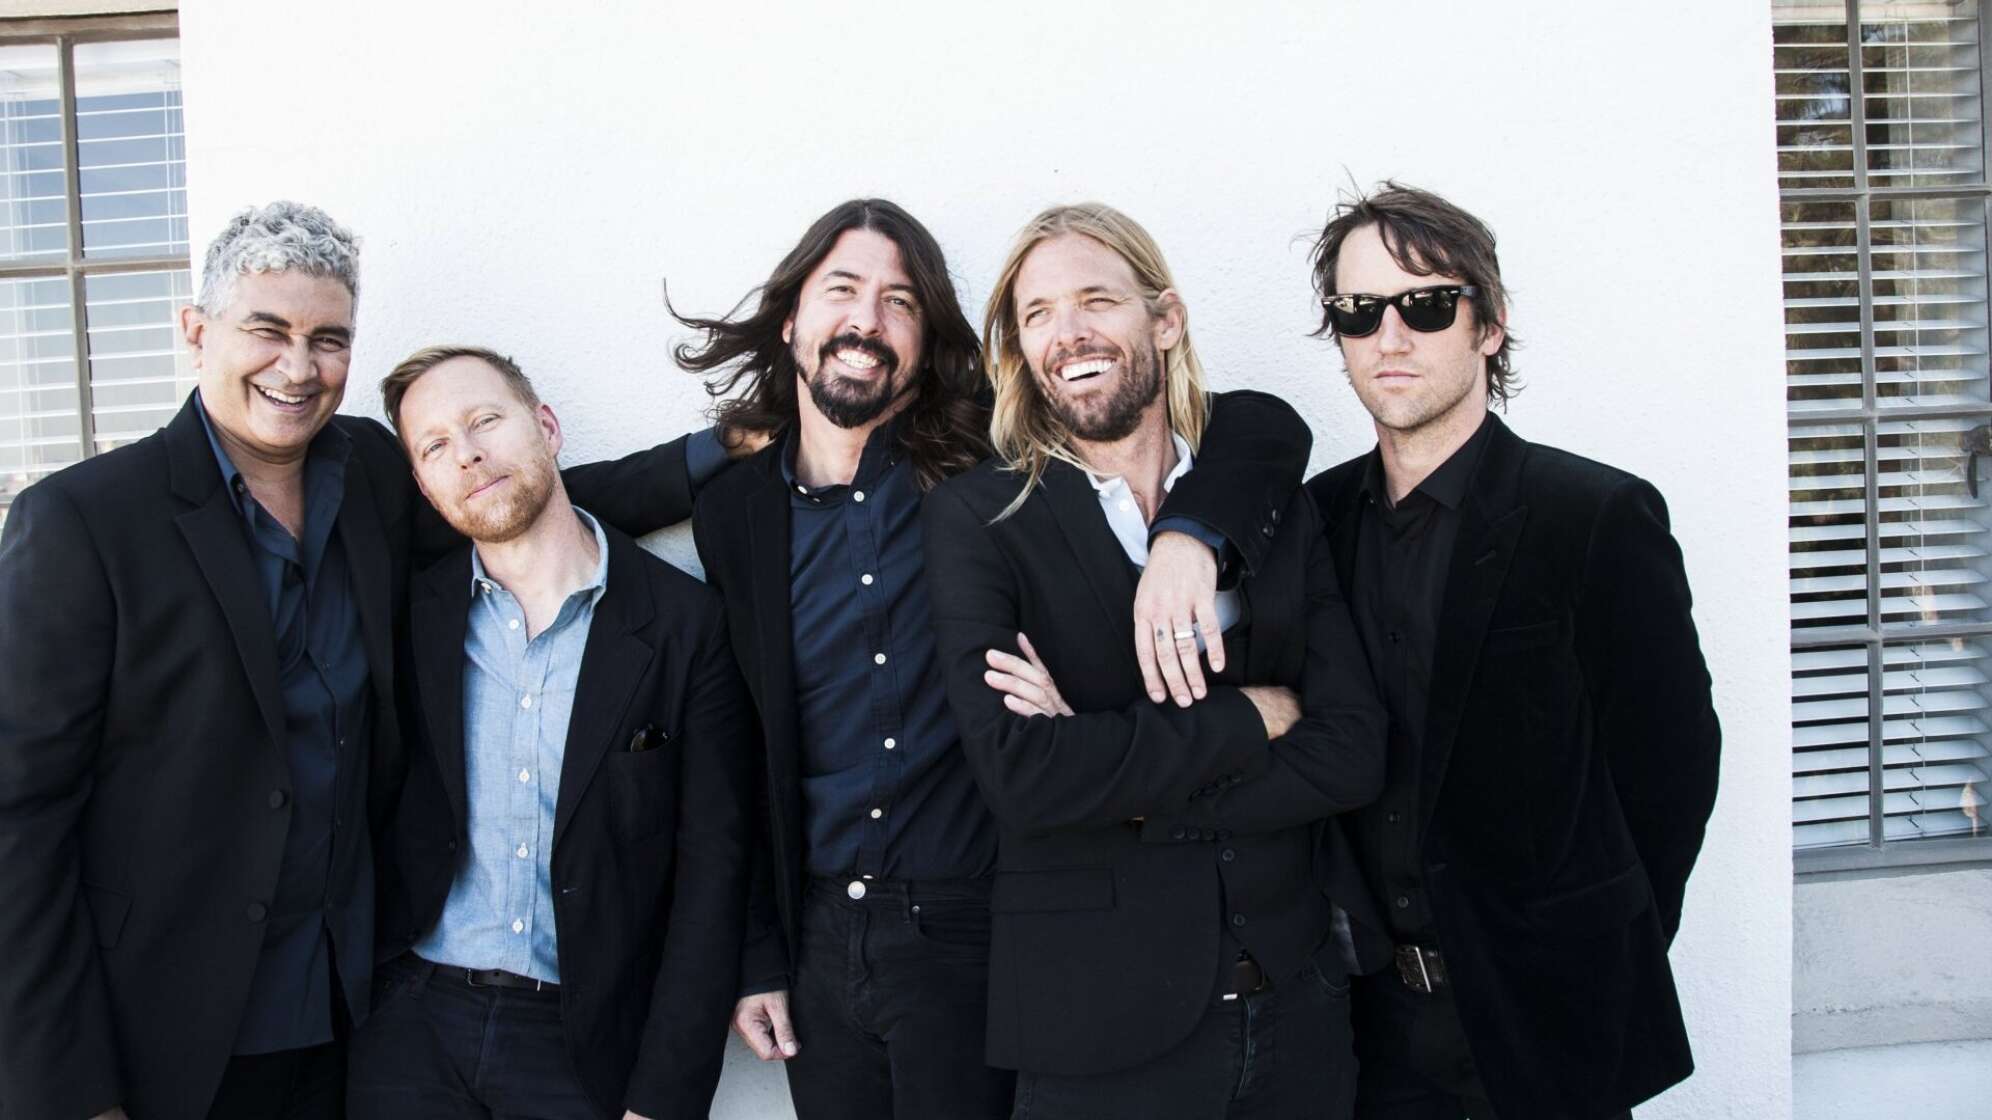 Image of Foo Fighters rock band